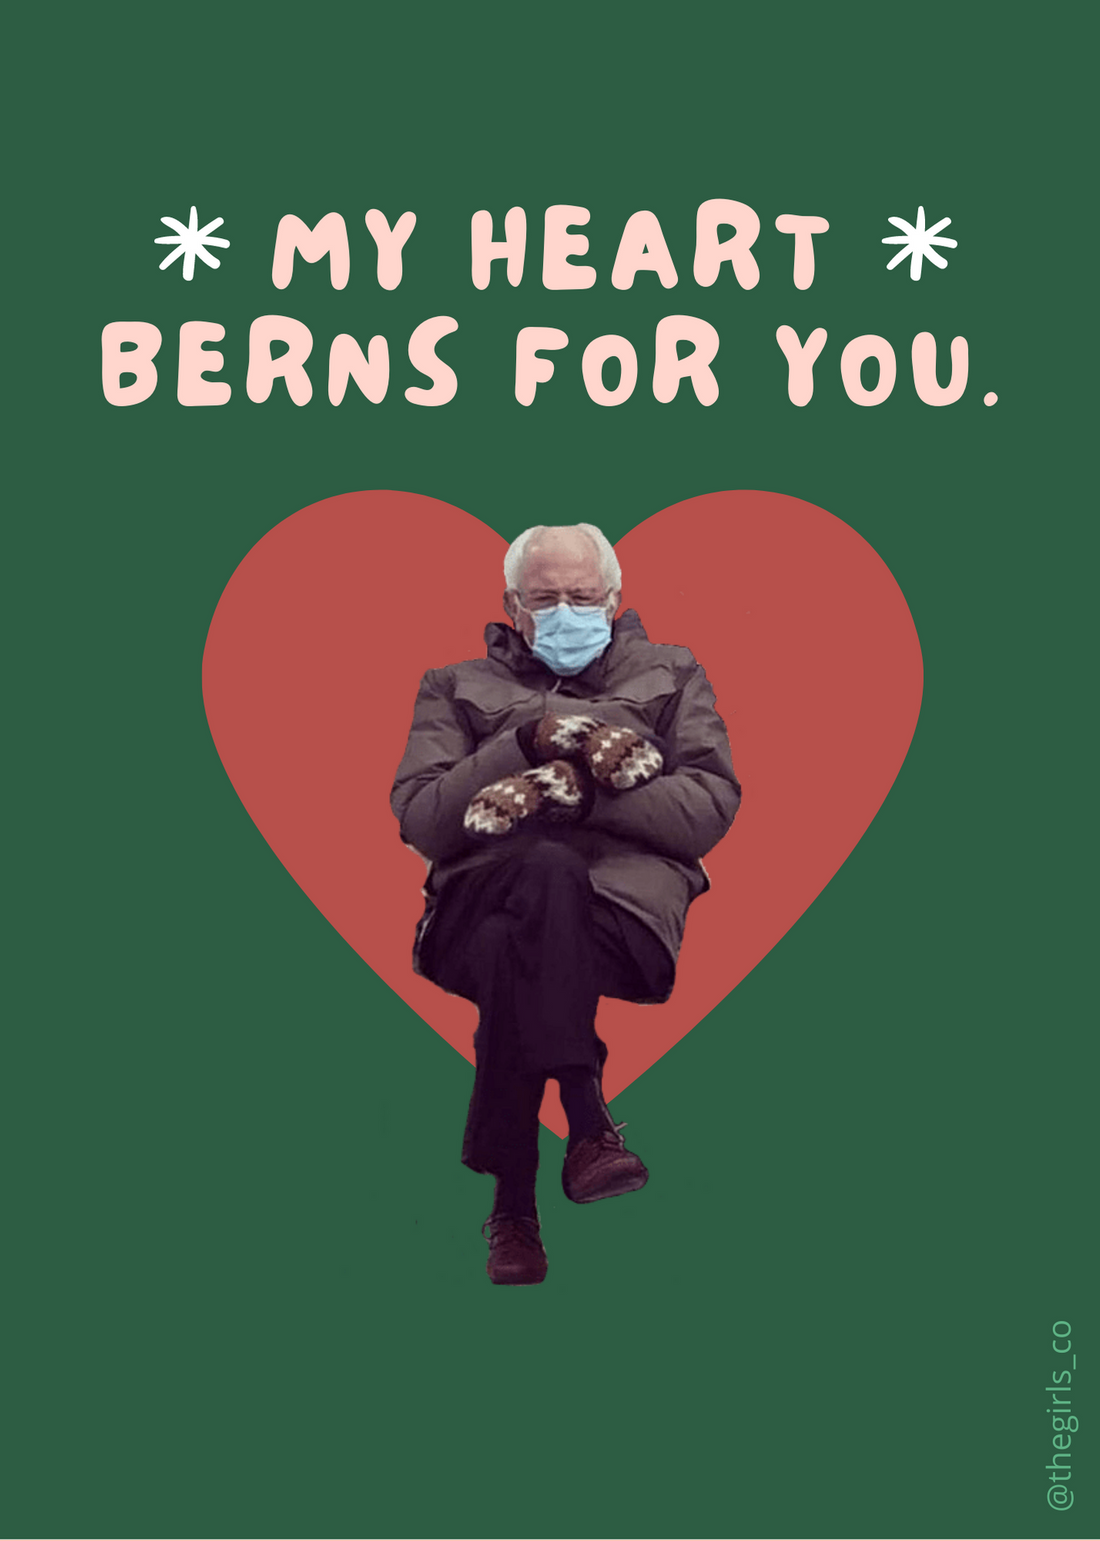 Funny Printable Valentines + The Gifts You Should Pair Them With!! (Featuring Bernie Sanders, The Rock, Taylor Swift and More)